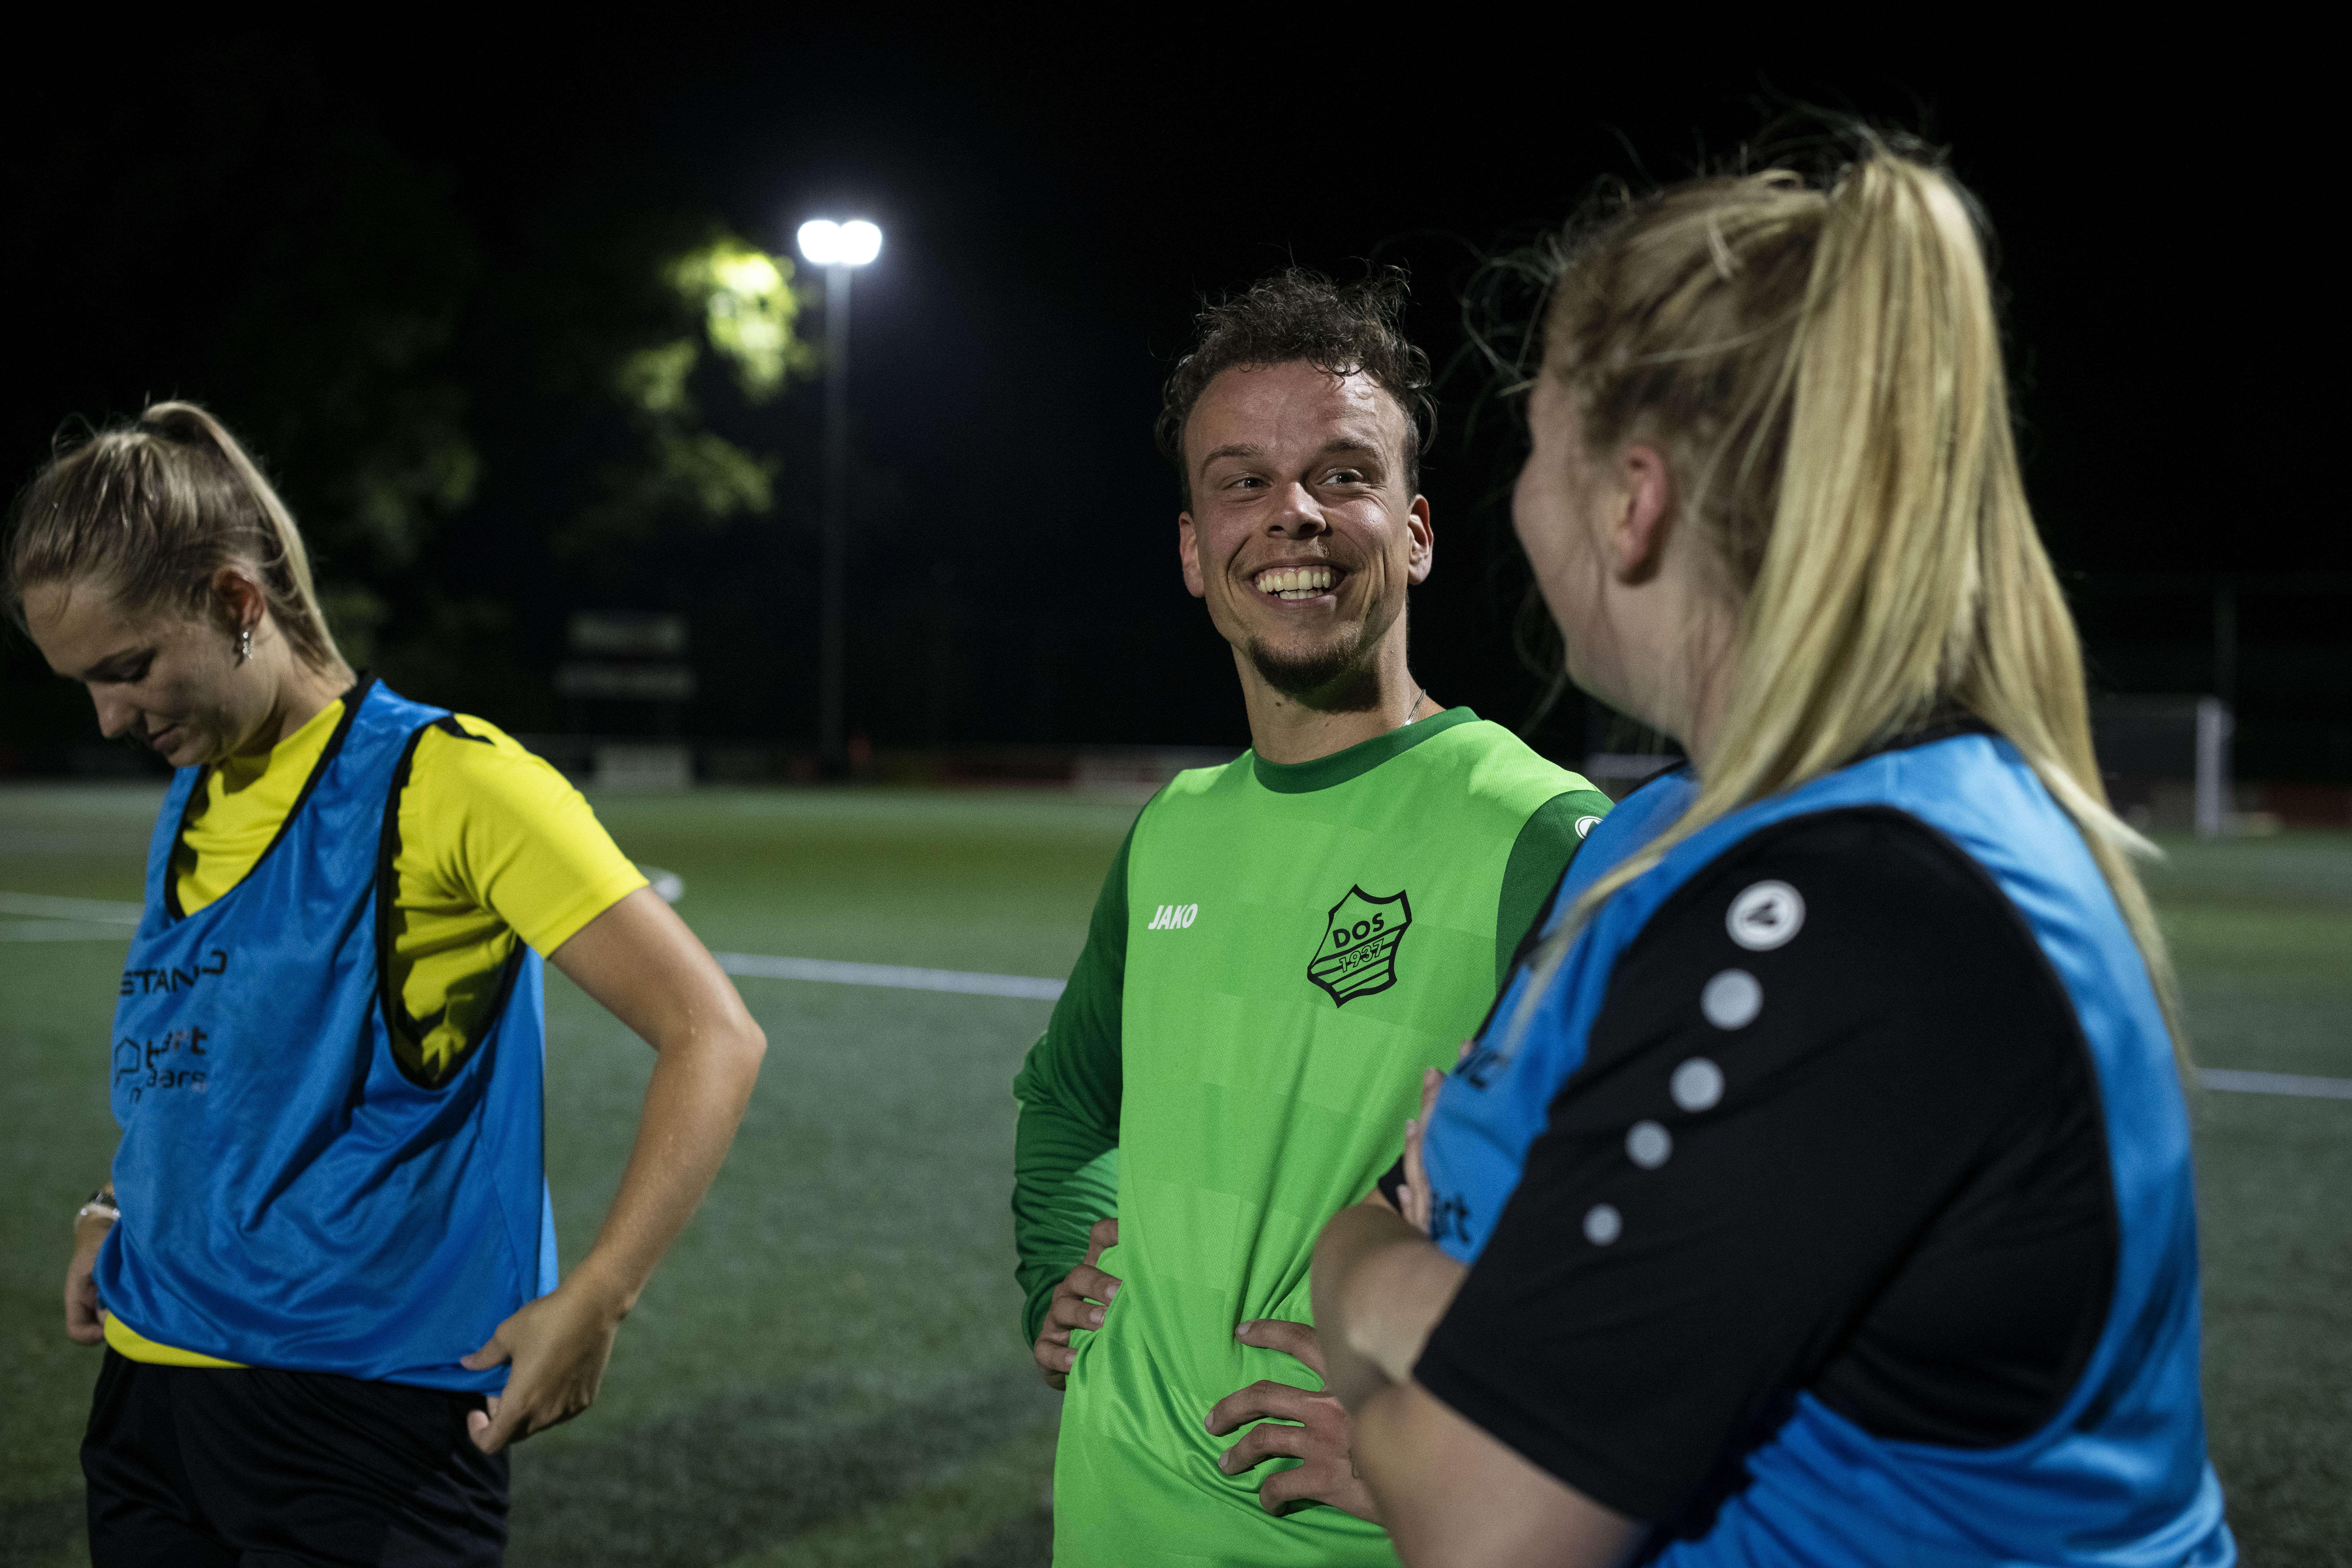 three players on a football field at night. Two of them look at each other smiling and the third one looks down. They're dressed in black, blue, yellow and green